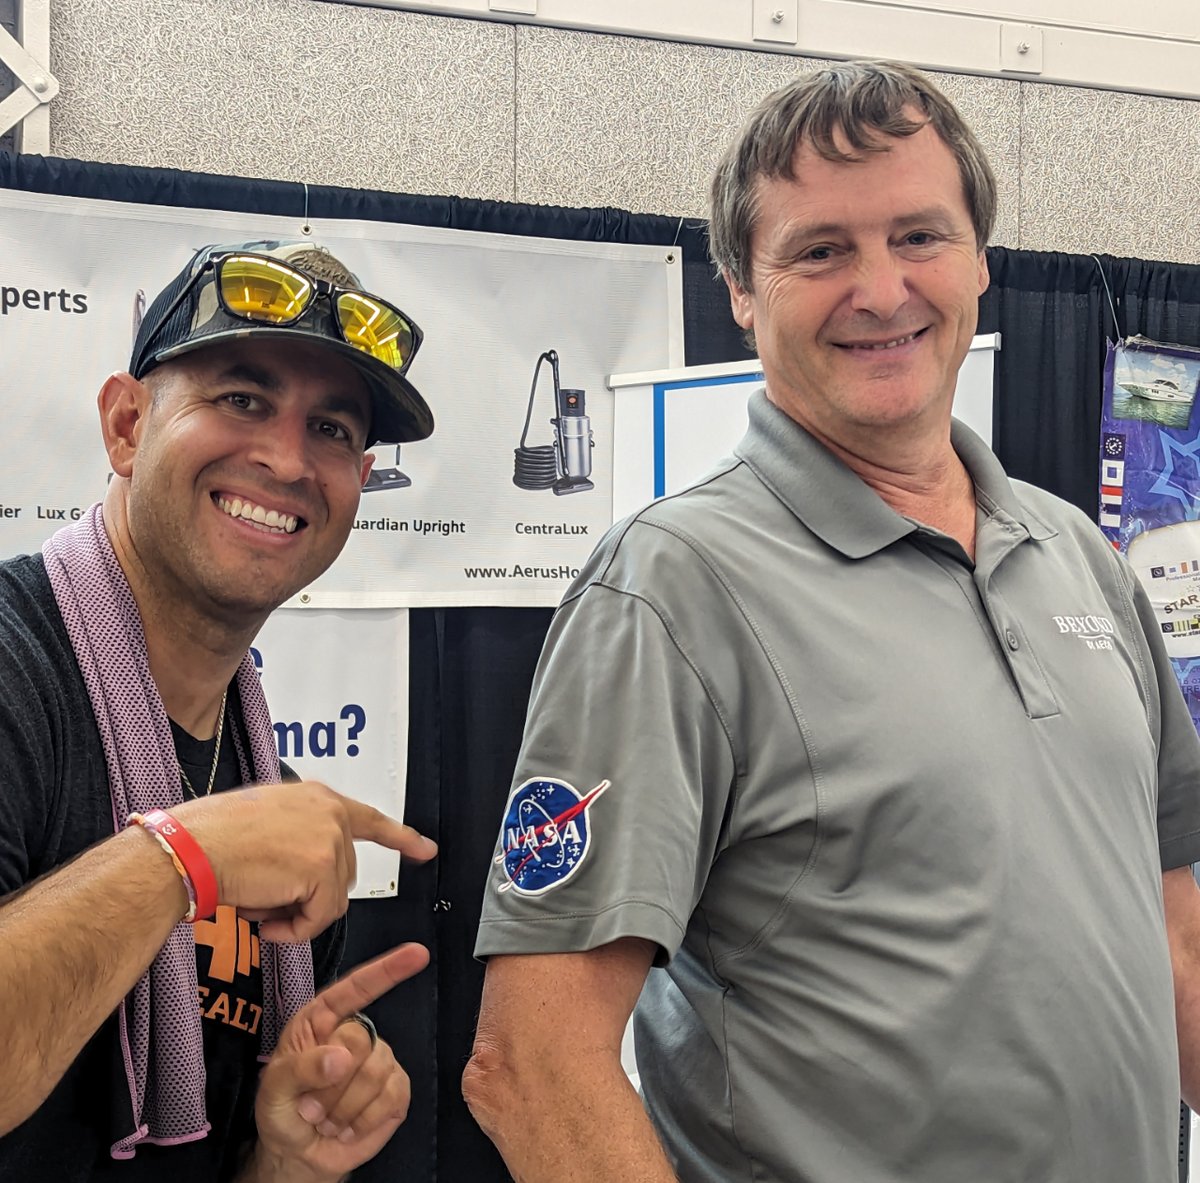 🚀 Meet Russ from NASA! 🌌 He's brought a game-changer to fight asthma - a machine that makes a profound difference, drastically reducing inhaler use and more. 🌬️💪 Join the revolution for healthier lives! 🙌 #AsthmaSolutions #NASAInnovation 🌬️🛰️